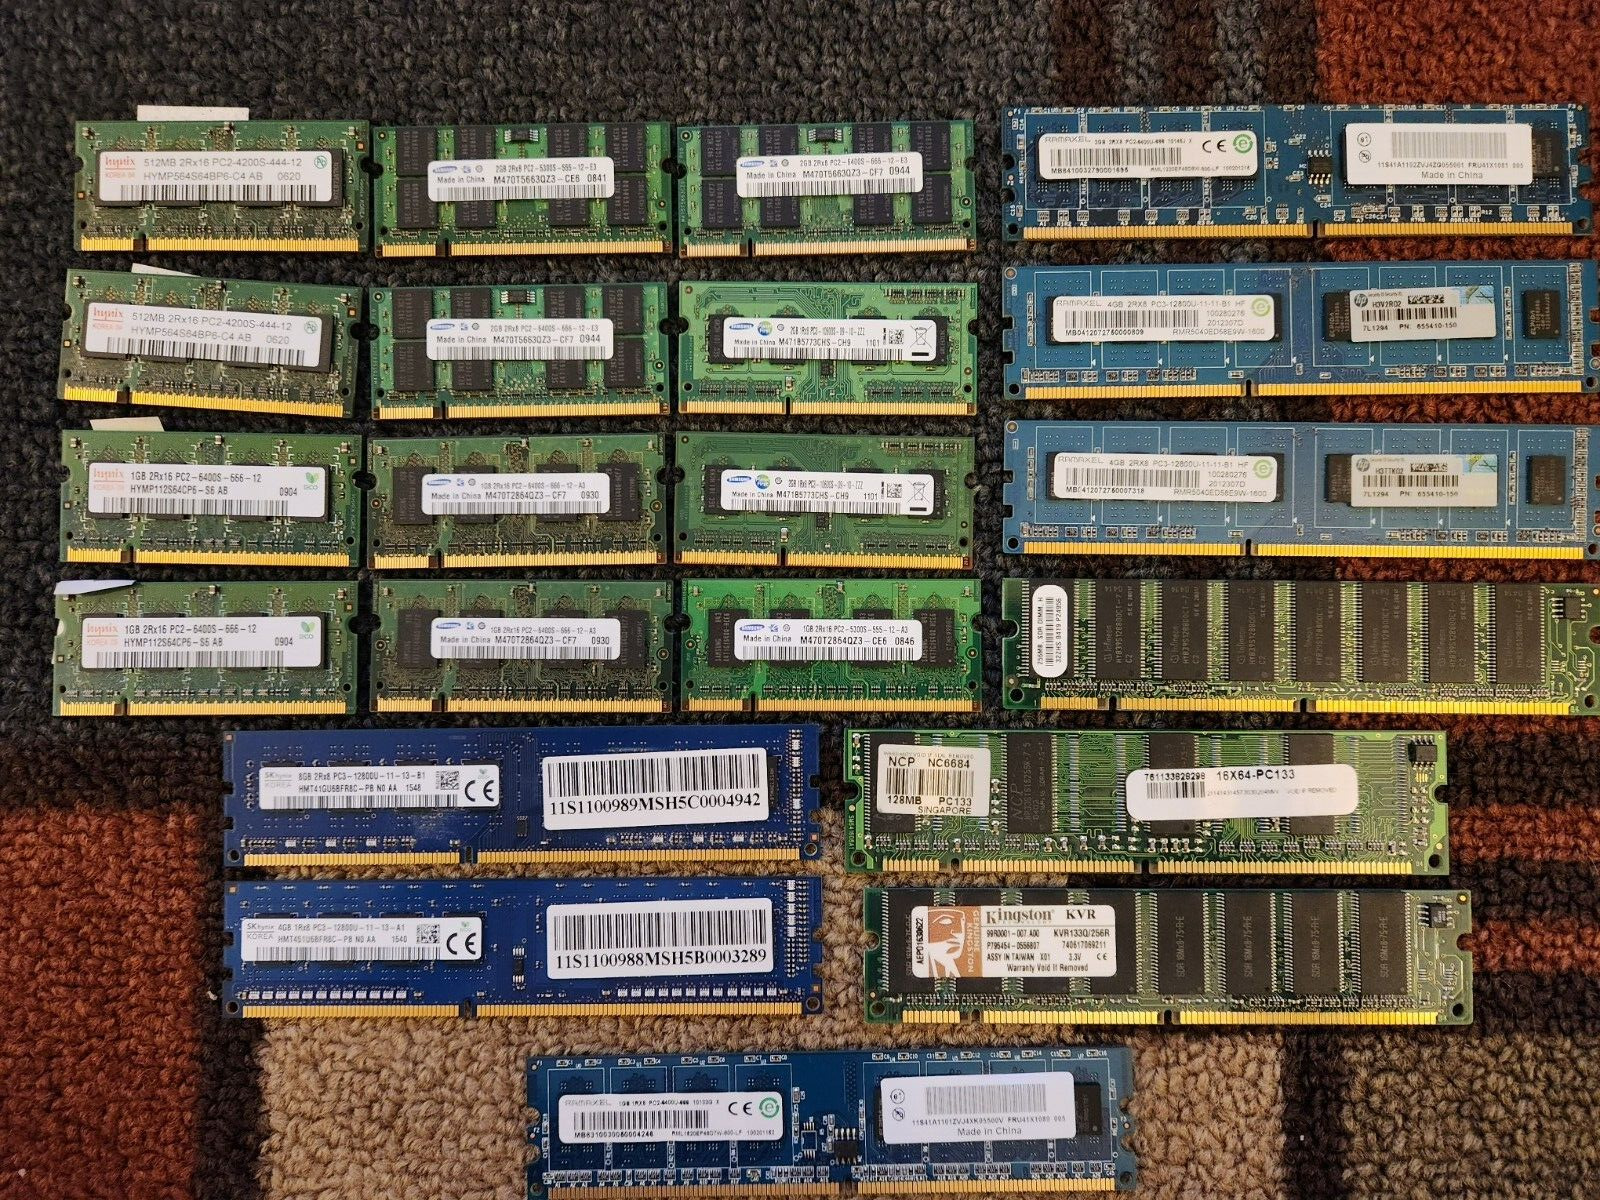 LOT of 21 PC and Laptop Memory Sticks (128MB - 8GB) Samsung, Kingston + More